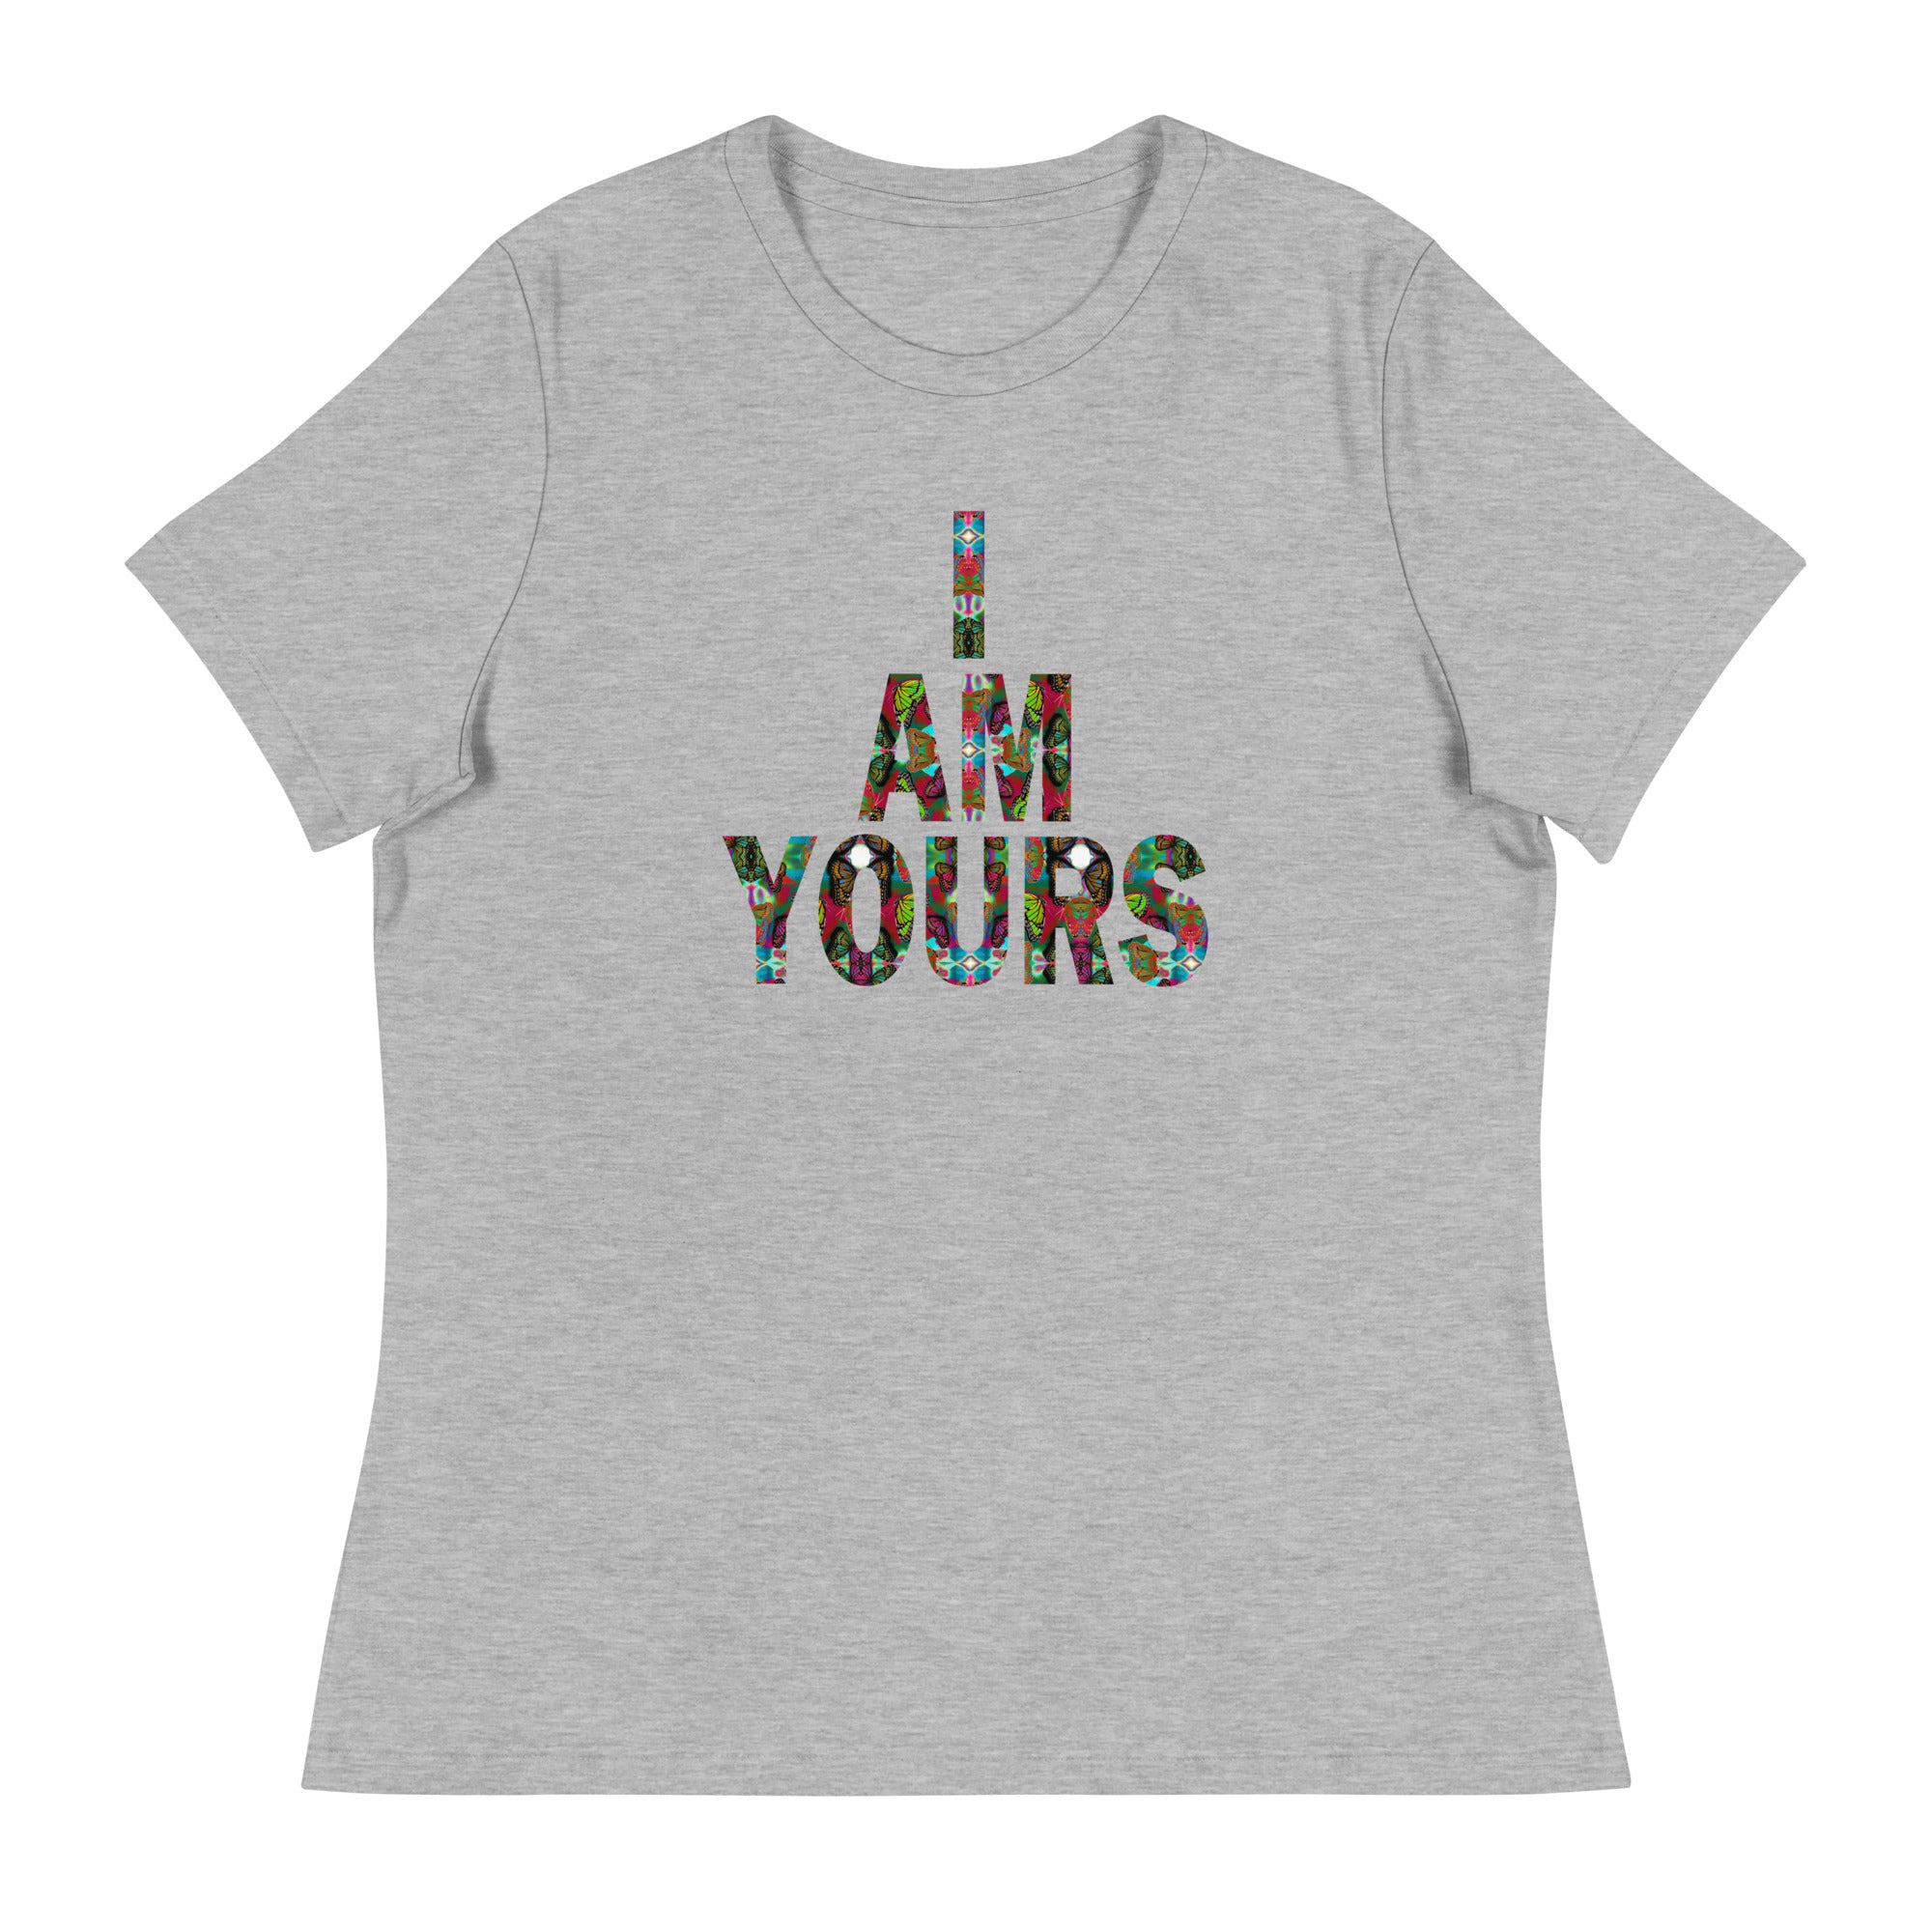 I AM YOURS ~ Women's Graphic T-Shirt, Butterfly Word Art Short Sleeve Top